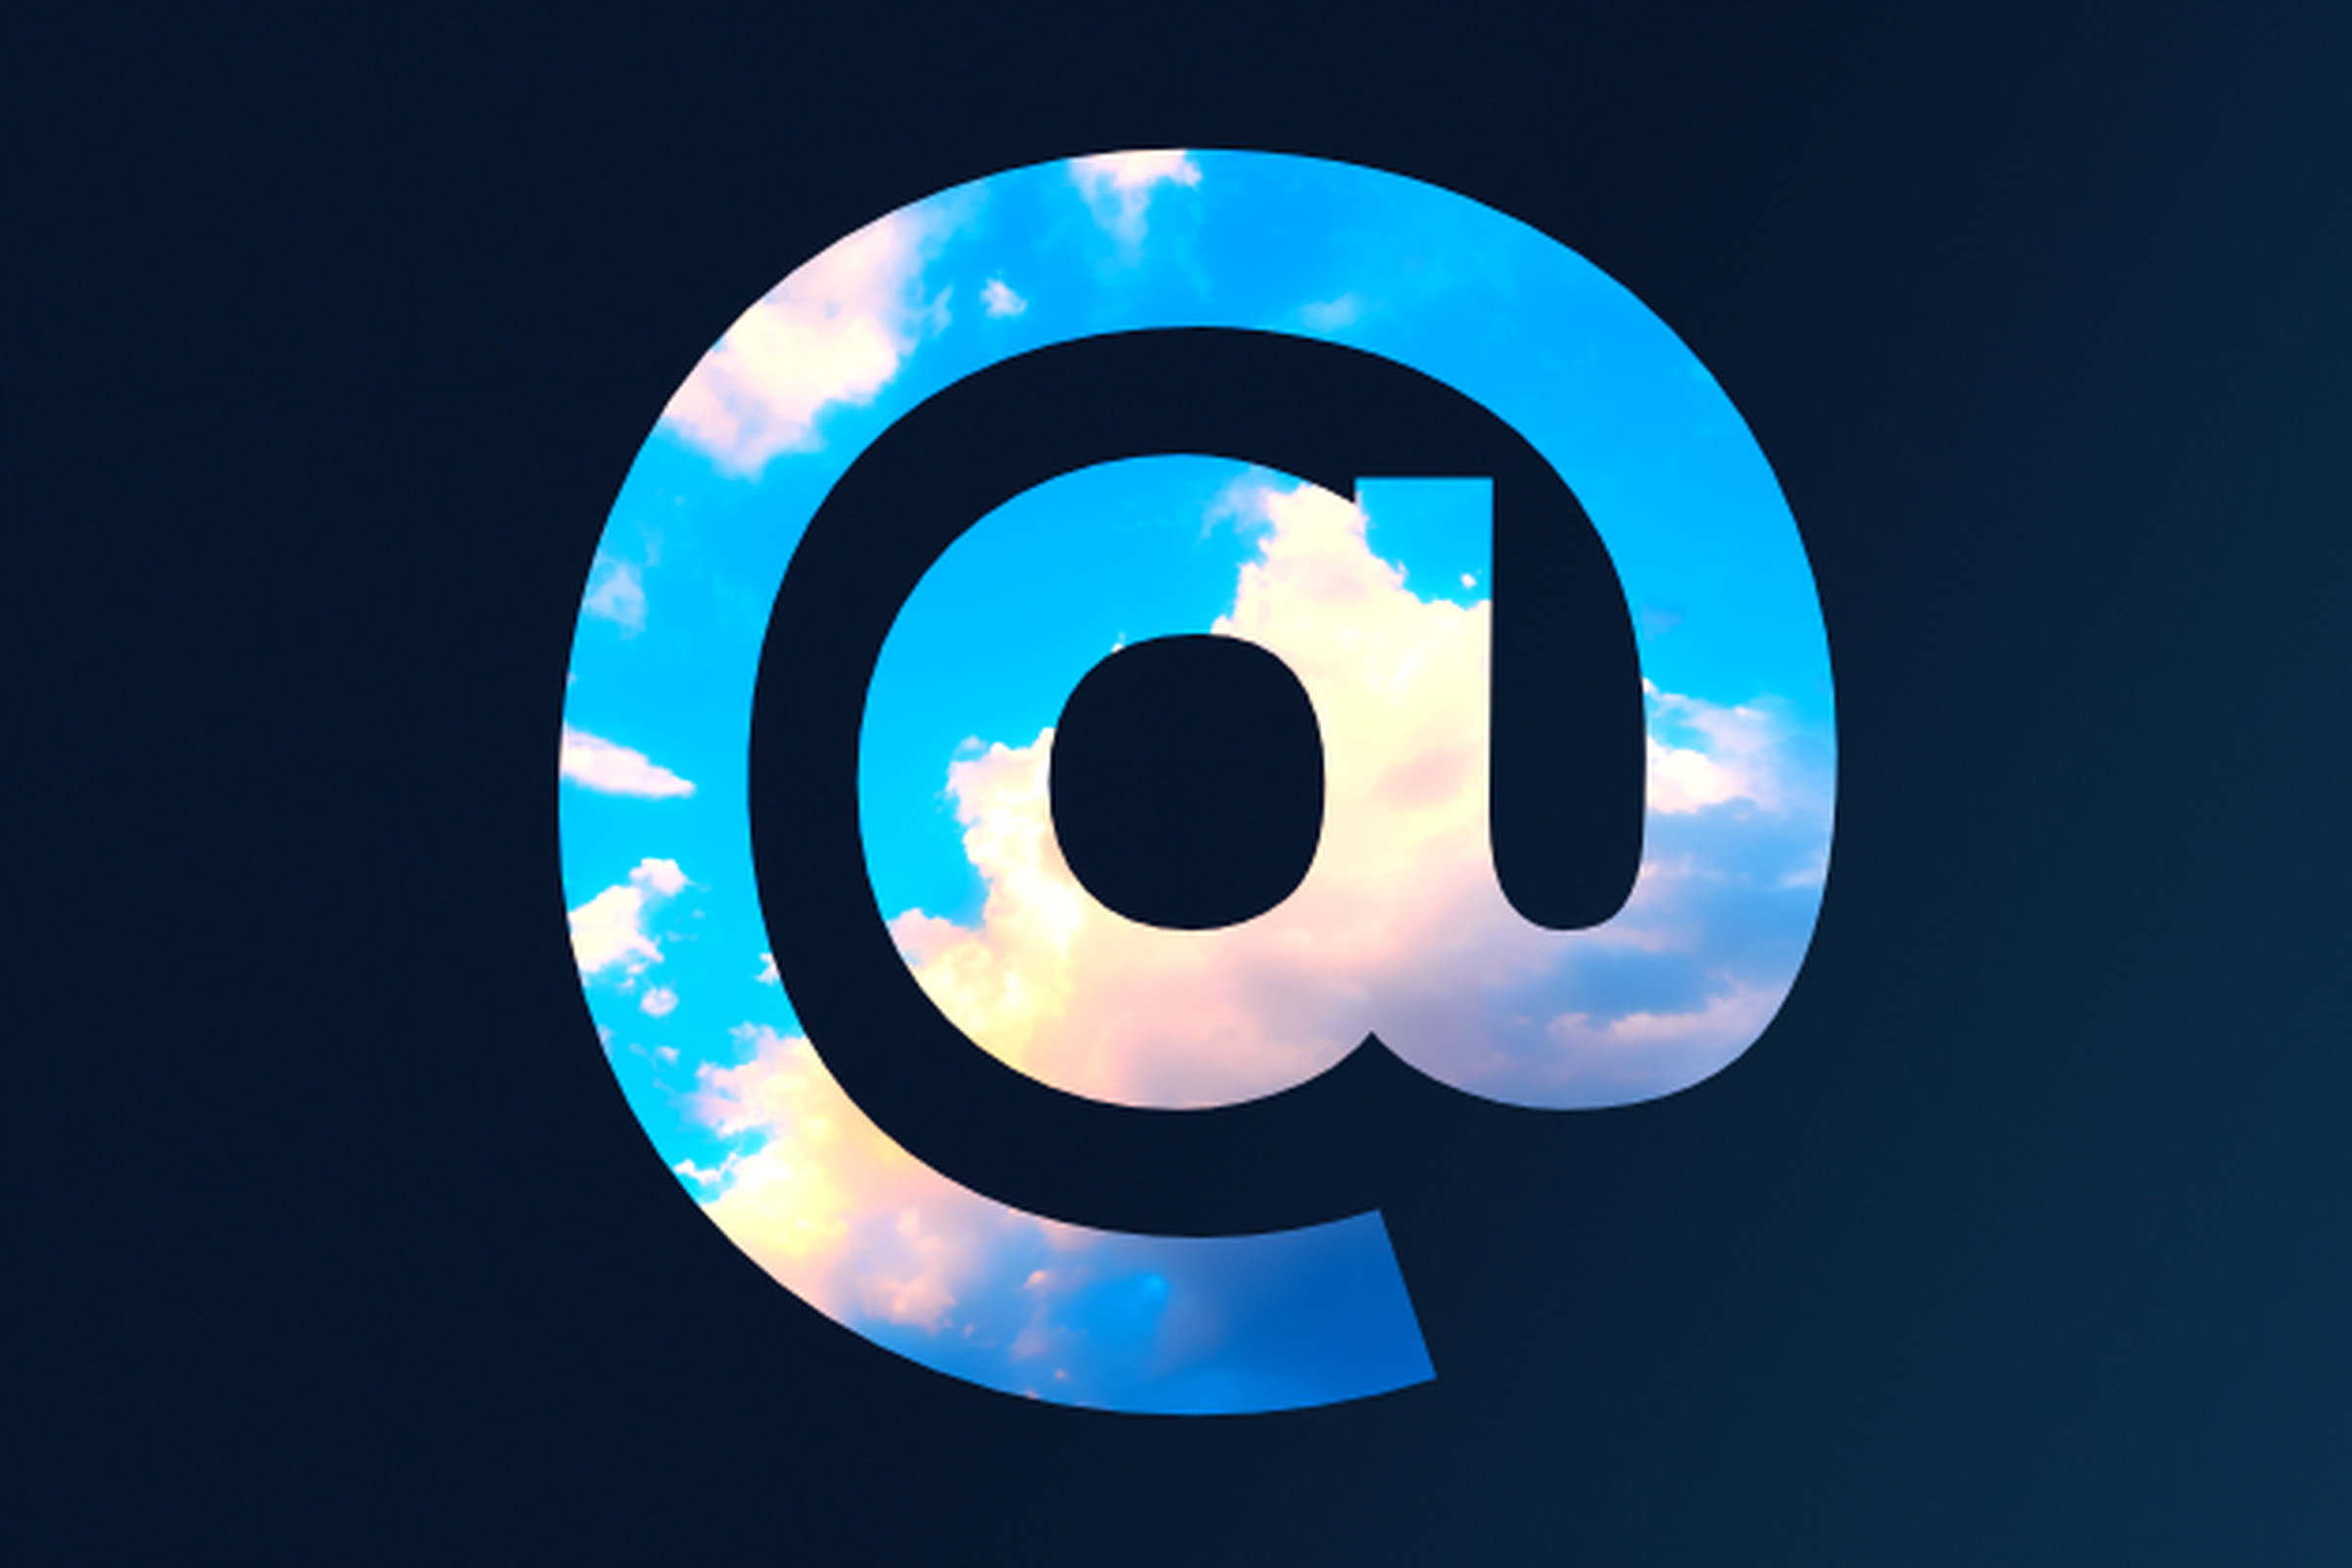 An @ symbol showing a window to a bright blue sky with fluffy clouds.